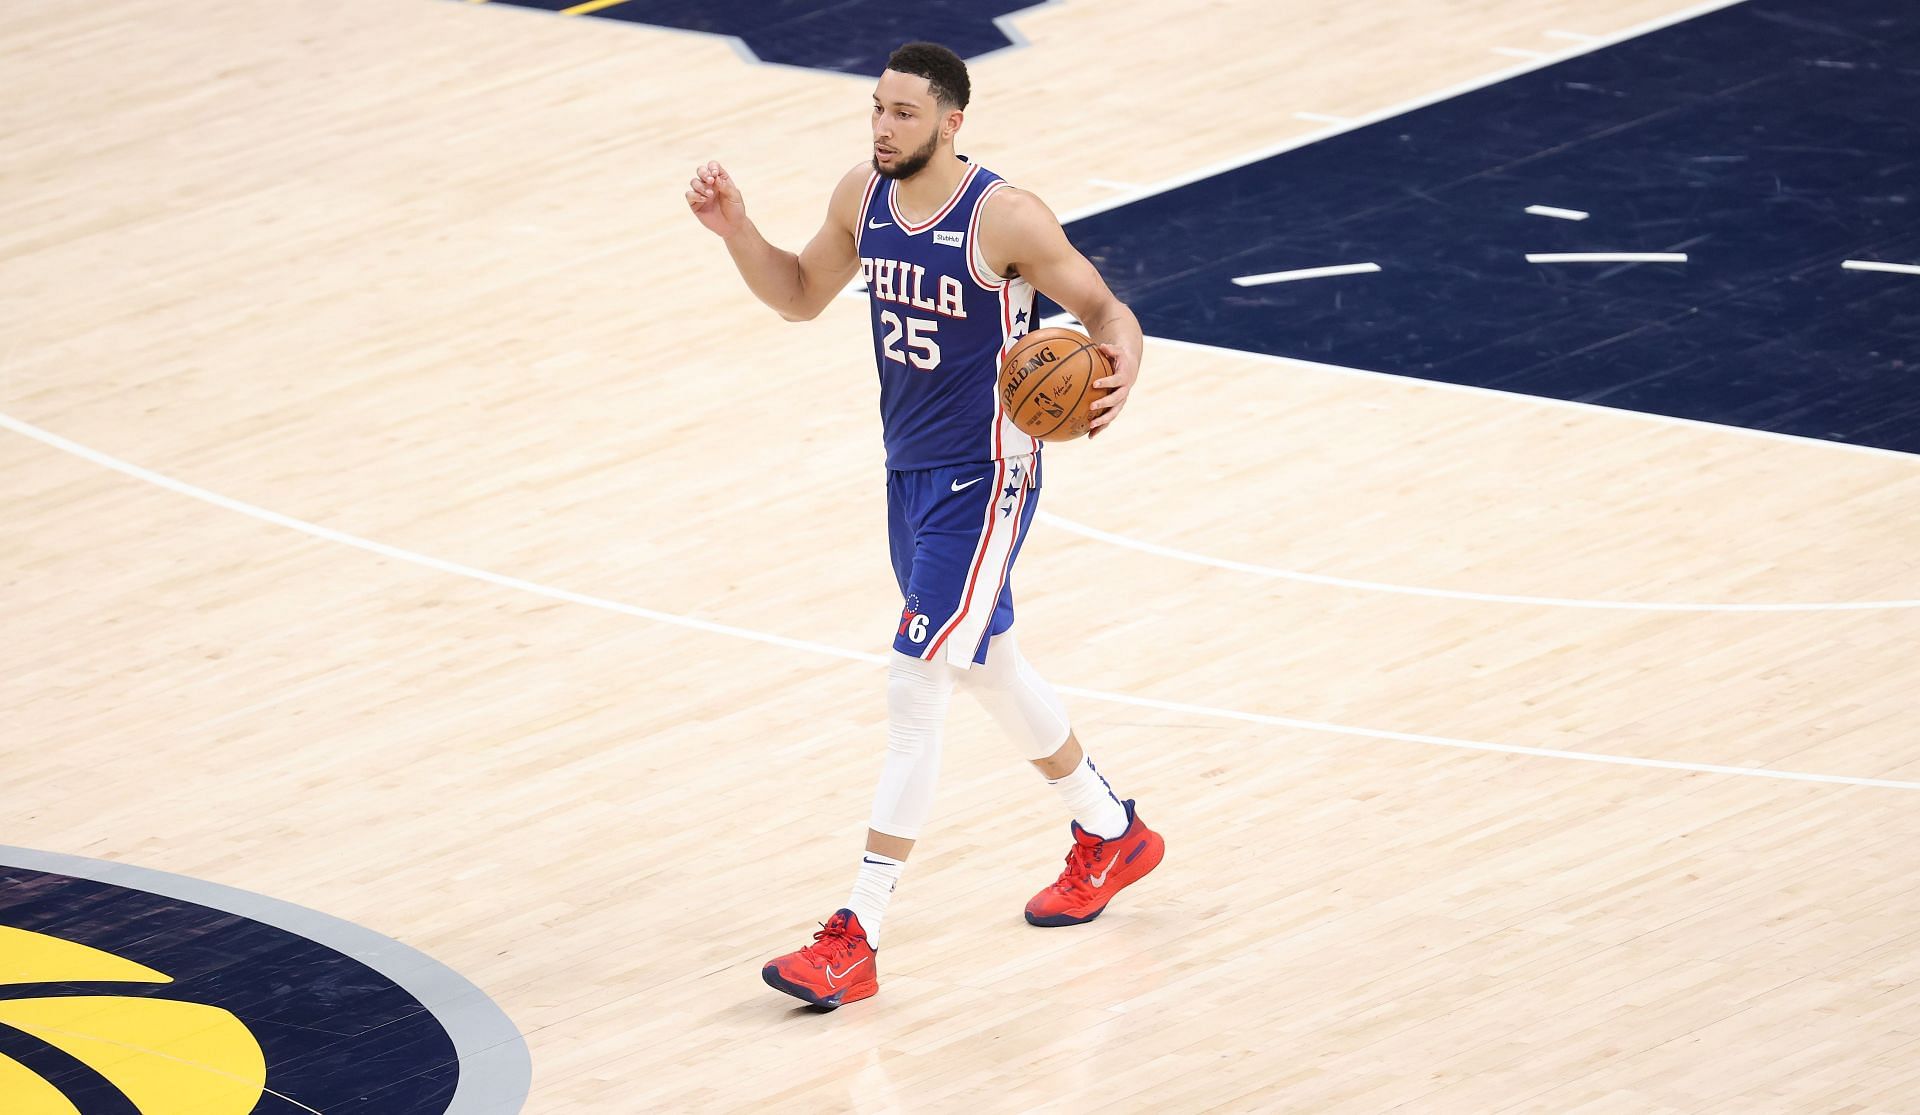 Simmons is yet to play for the 76ers this season